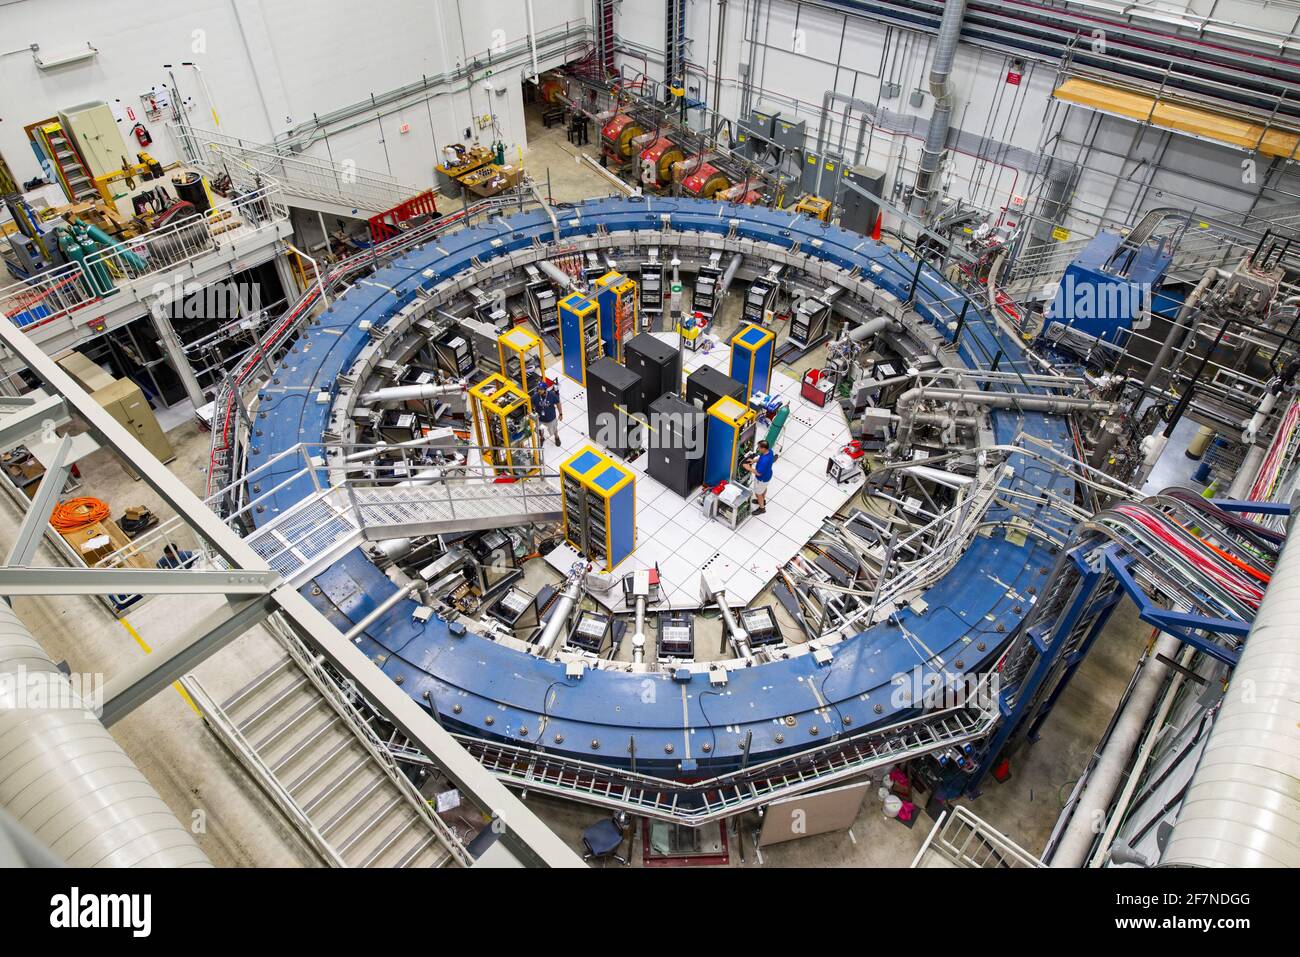 The Muon g-2 ring sits in its detector hall amidst electronics racks, the muon beam-line, and other equipment. This impressive experiment operates at negative 450 degrees Fahrenheit and studies the precession (or wobble) of muons as they travel through the magnetic field. For the first time, scientists have precisely measured the interactions between neutrinos hitting the atomic nuclei in the heart of the Department of Energy's Fermilab particle detector. The findings, detailed in the journal Physical Review Letters, remove much of the uncertainty undermining theoretical models of neutrino osc Stock Photo